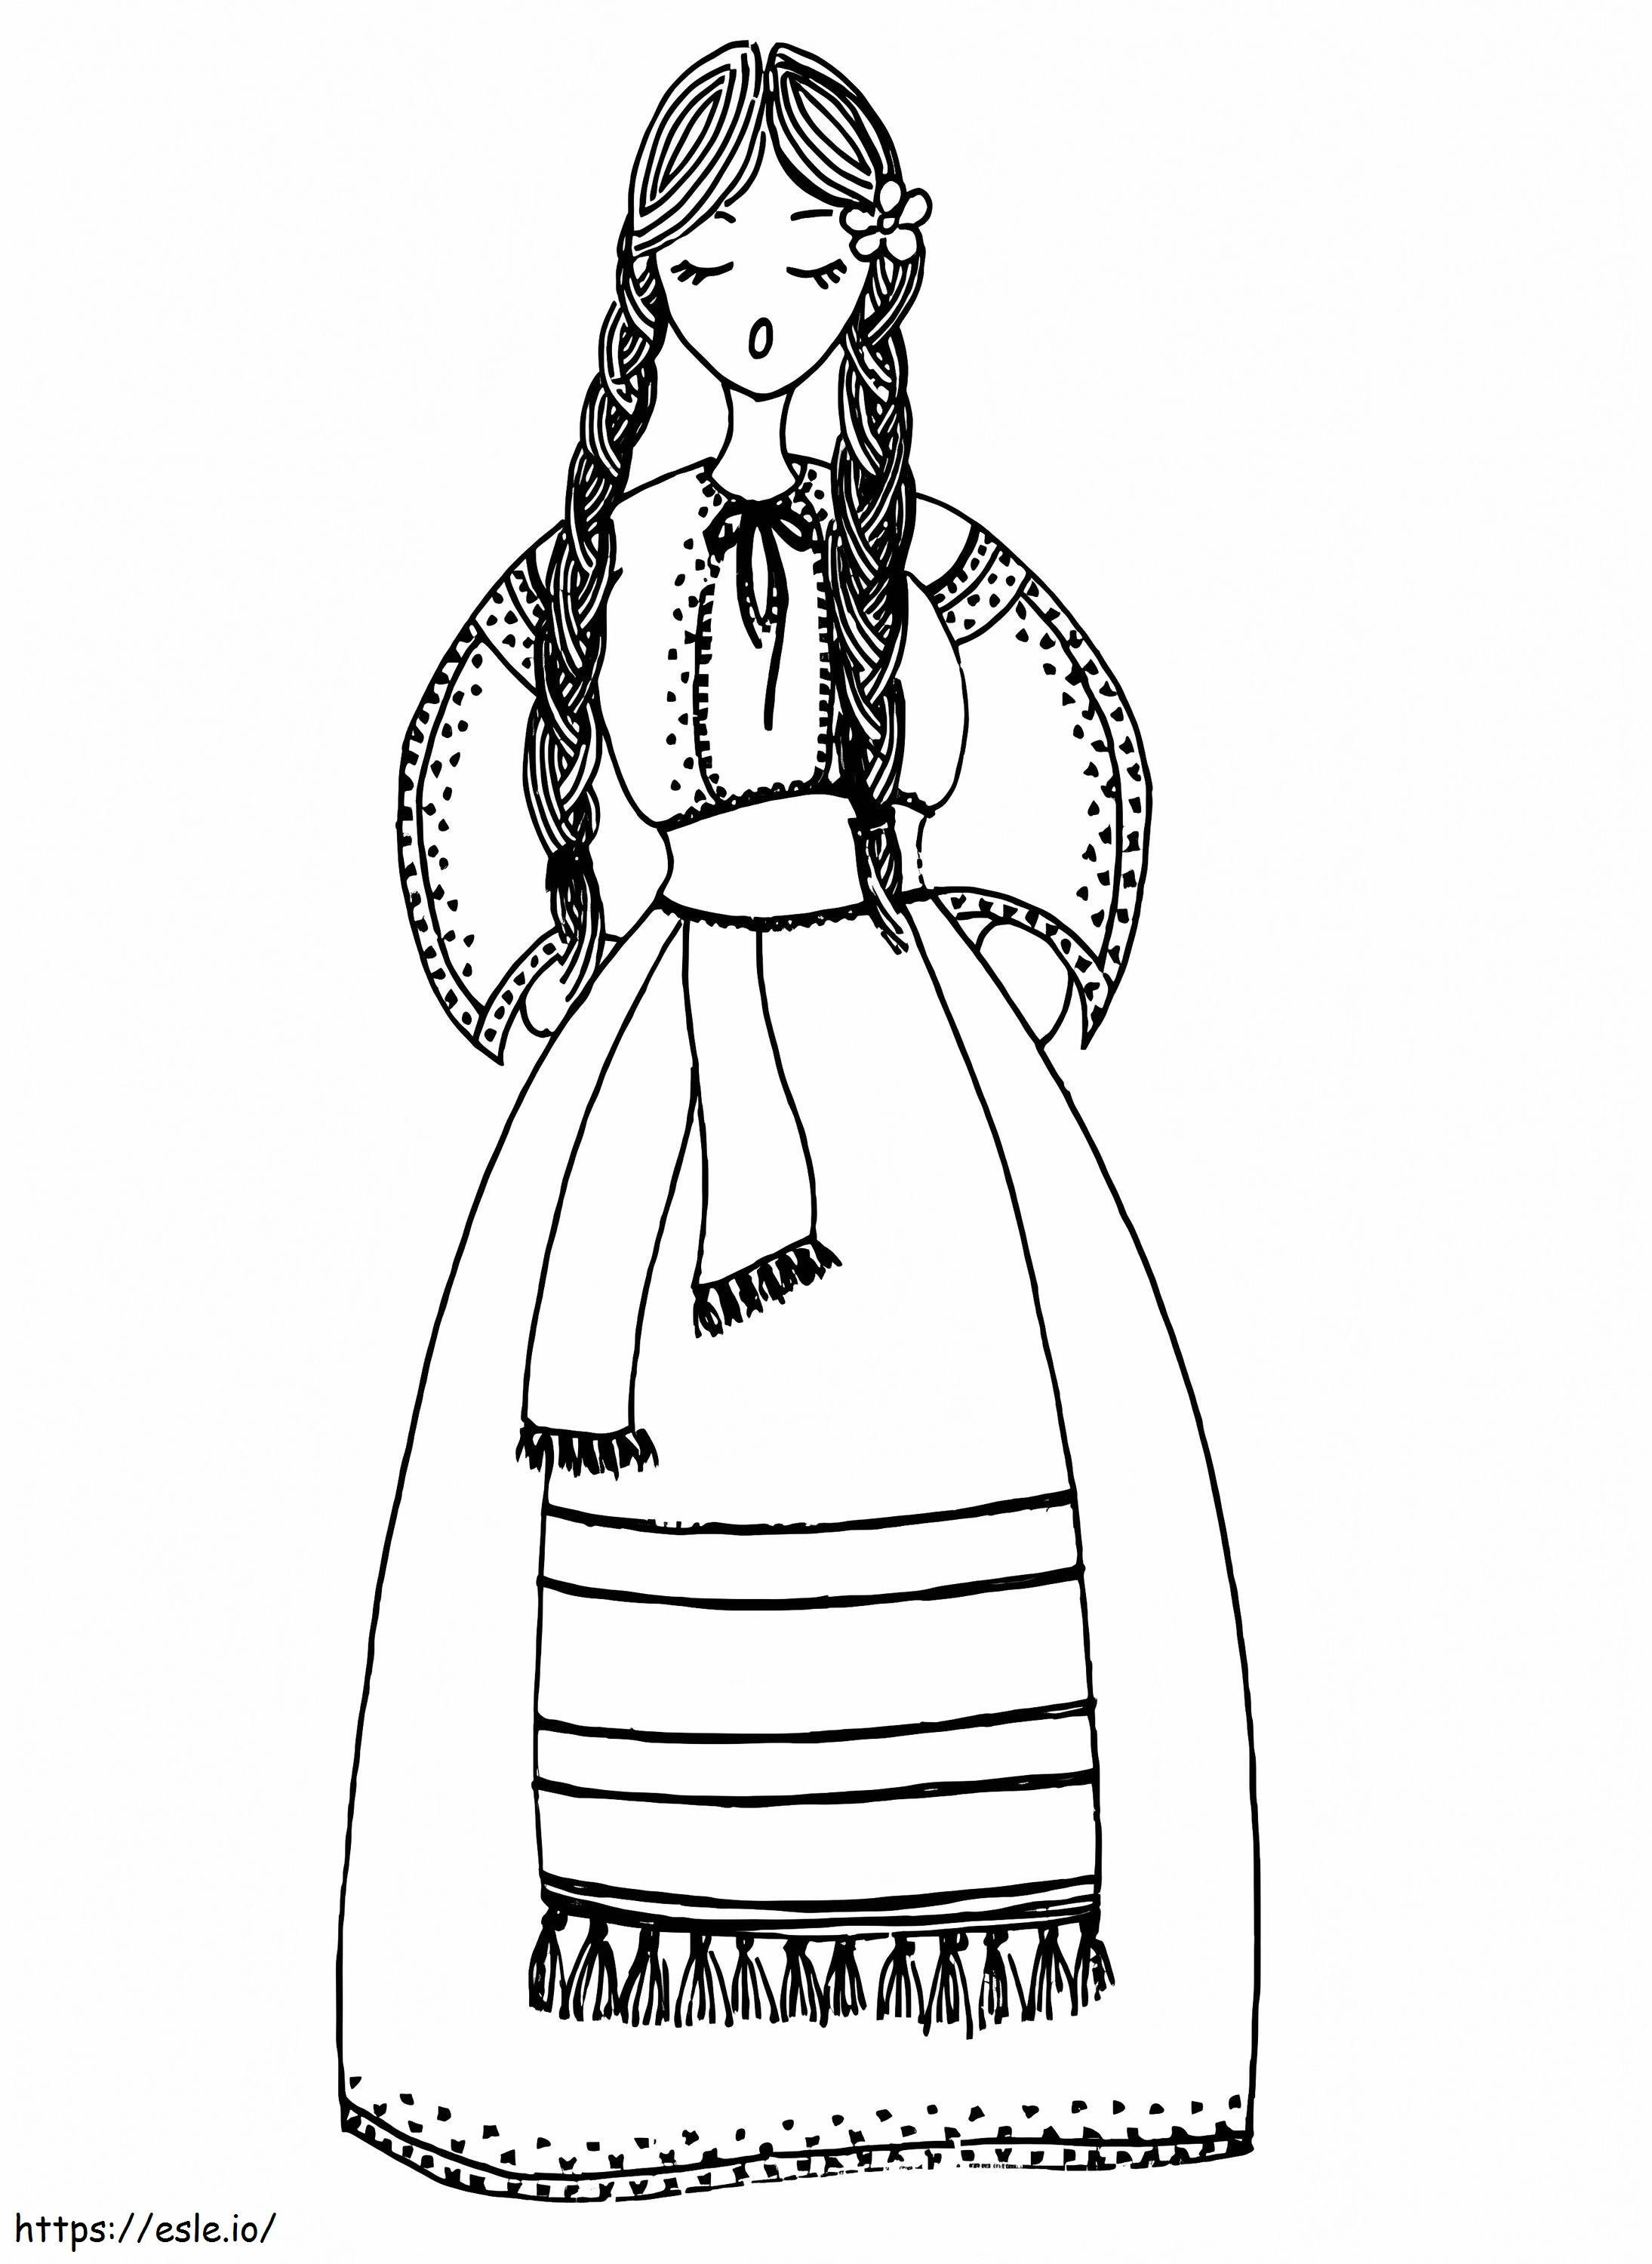 Romanian Girl 1 coloring page